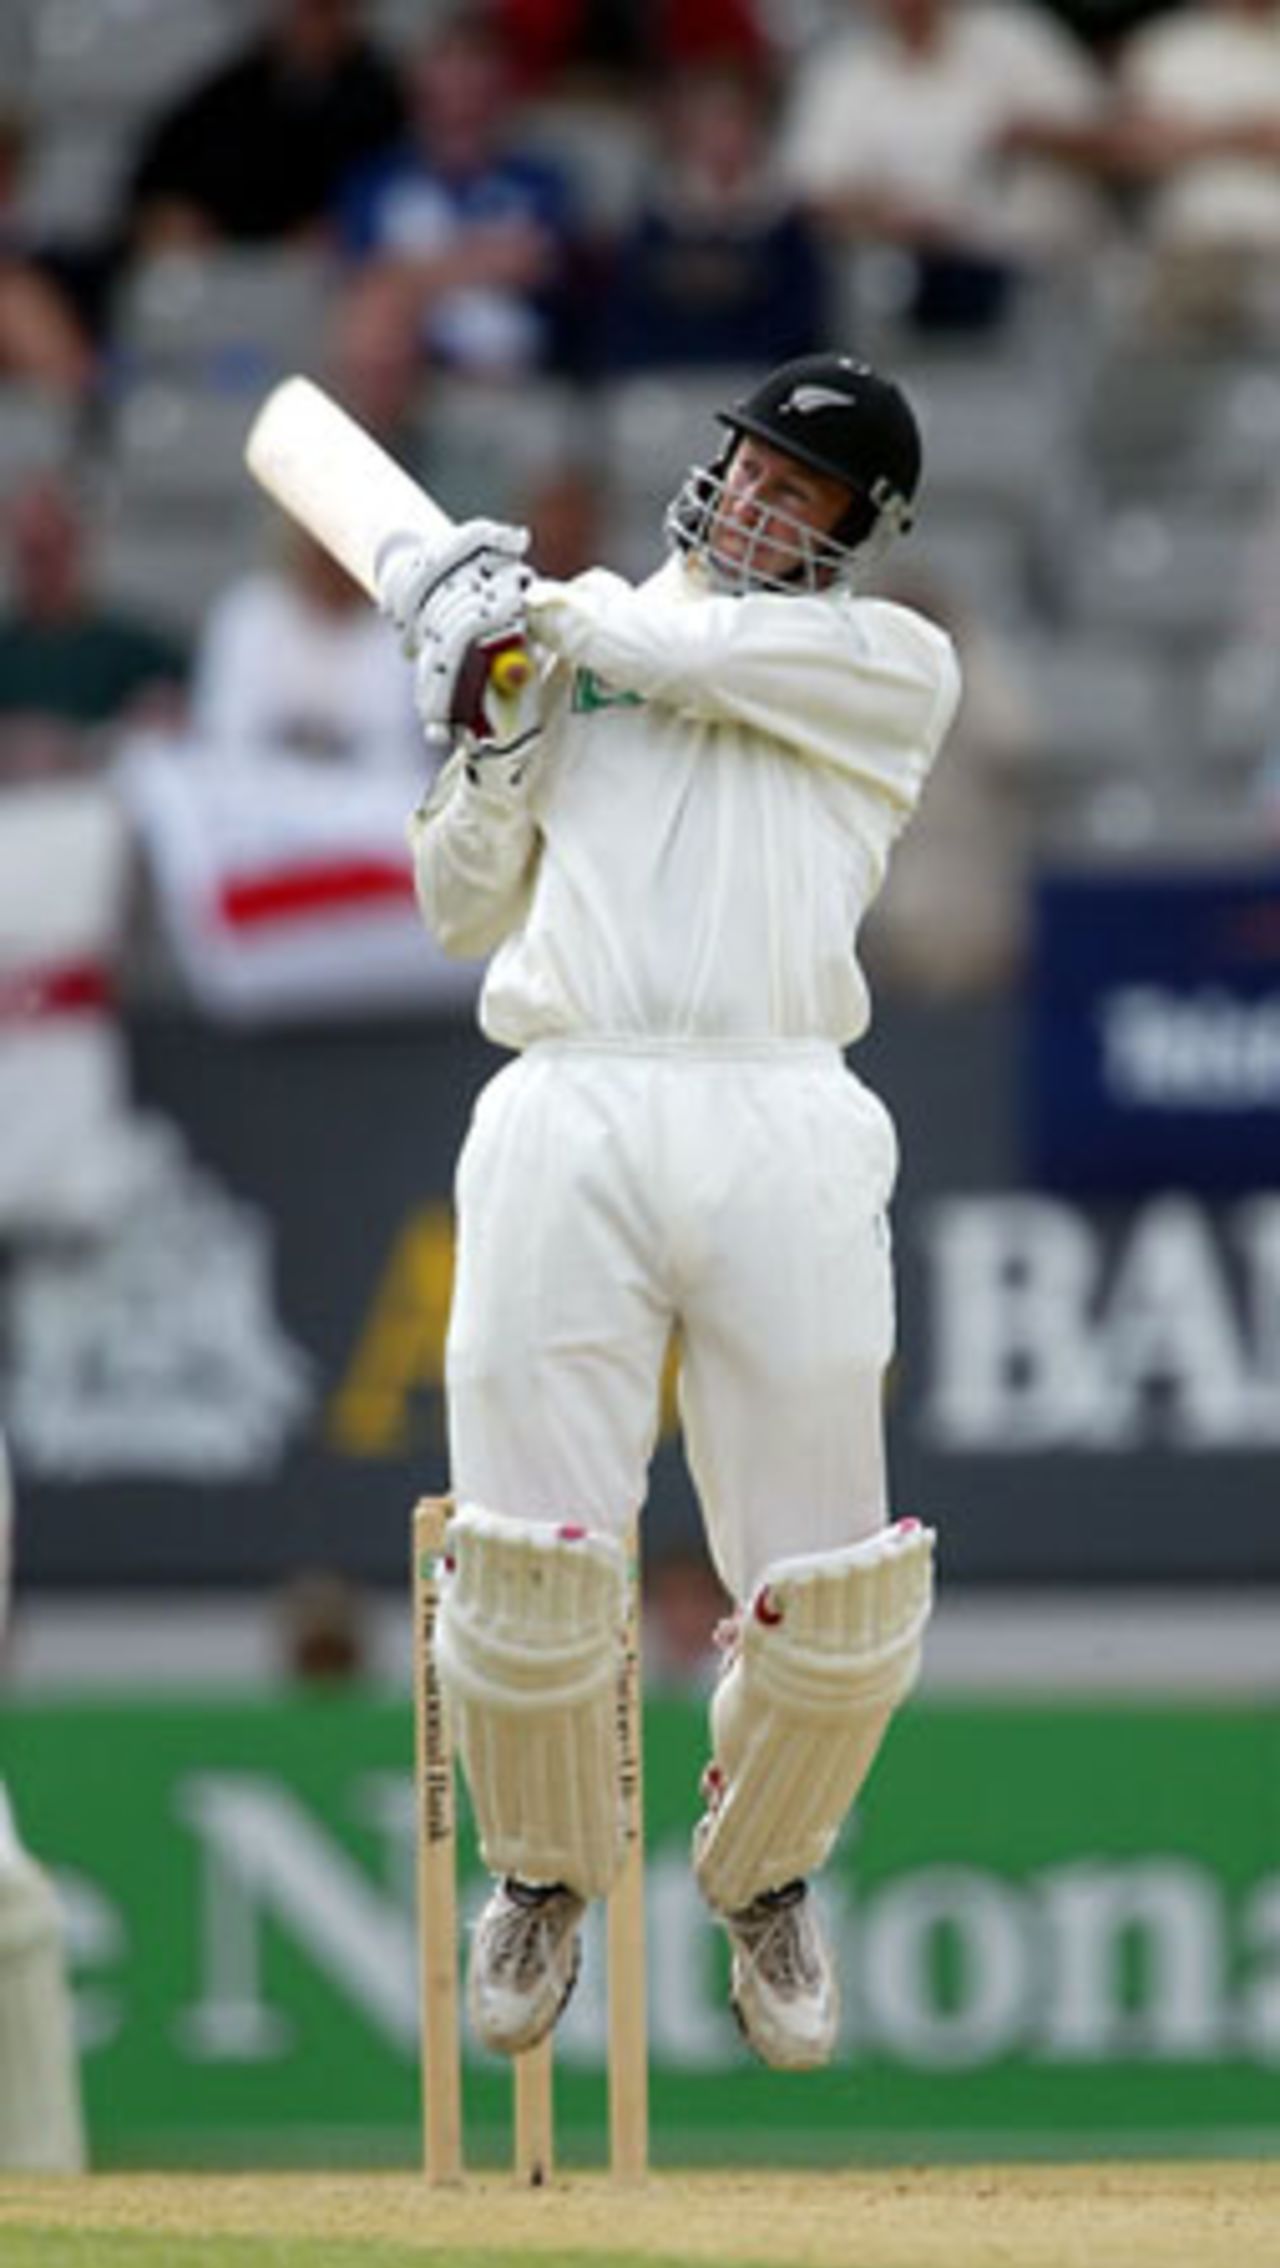 New Zealand batsman Chris Harris jumps to pull a short delivery through midwicket. Harris ended the first day on 55 not out. 3rd Test: New Zealand v England at Eden Park, Auckland, 30 March-3 April 2002 (30 March 2002).